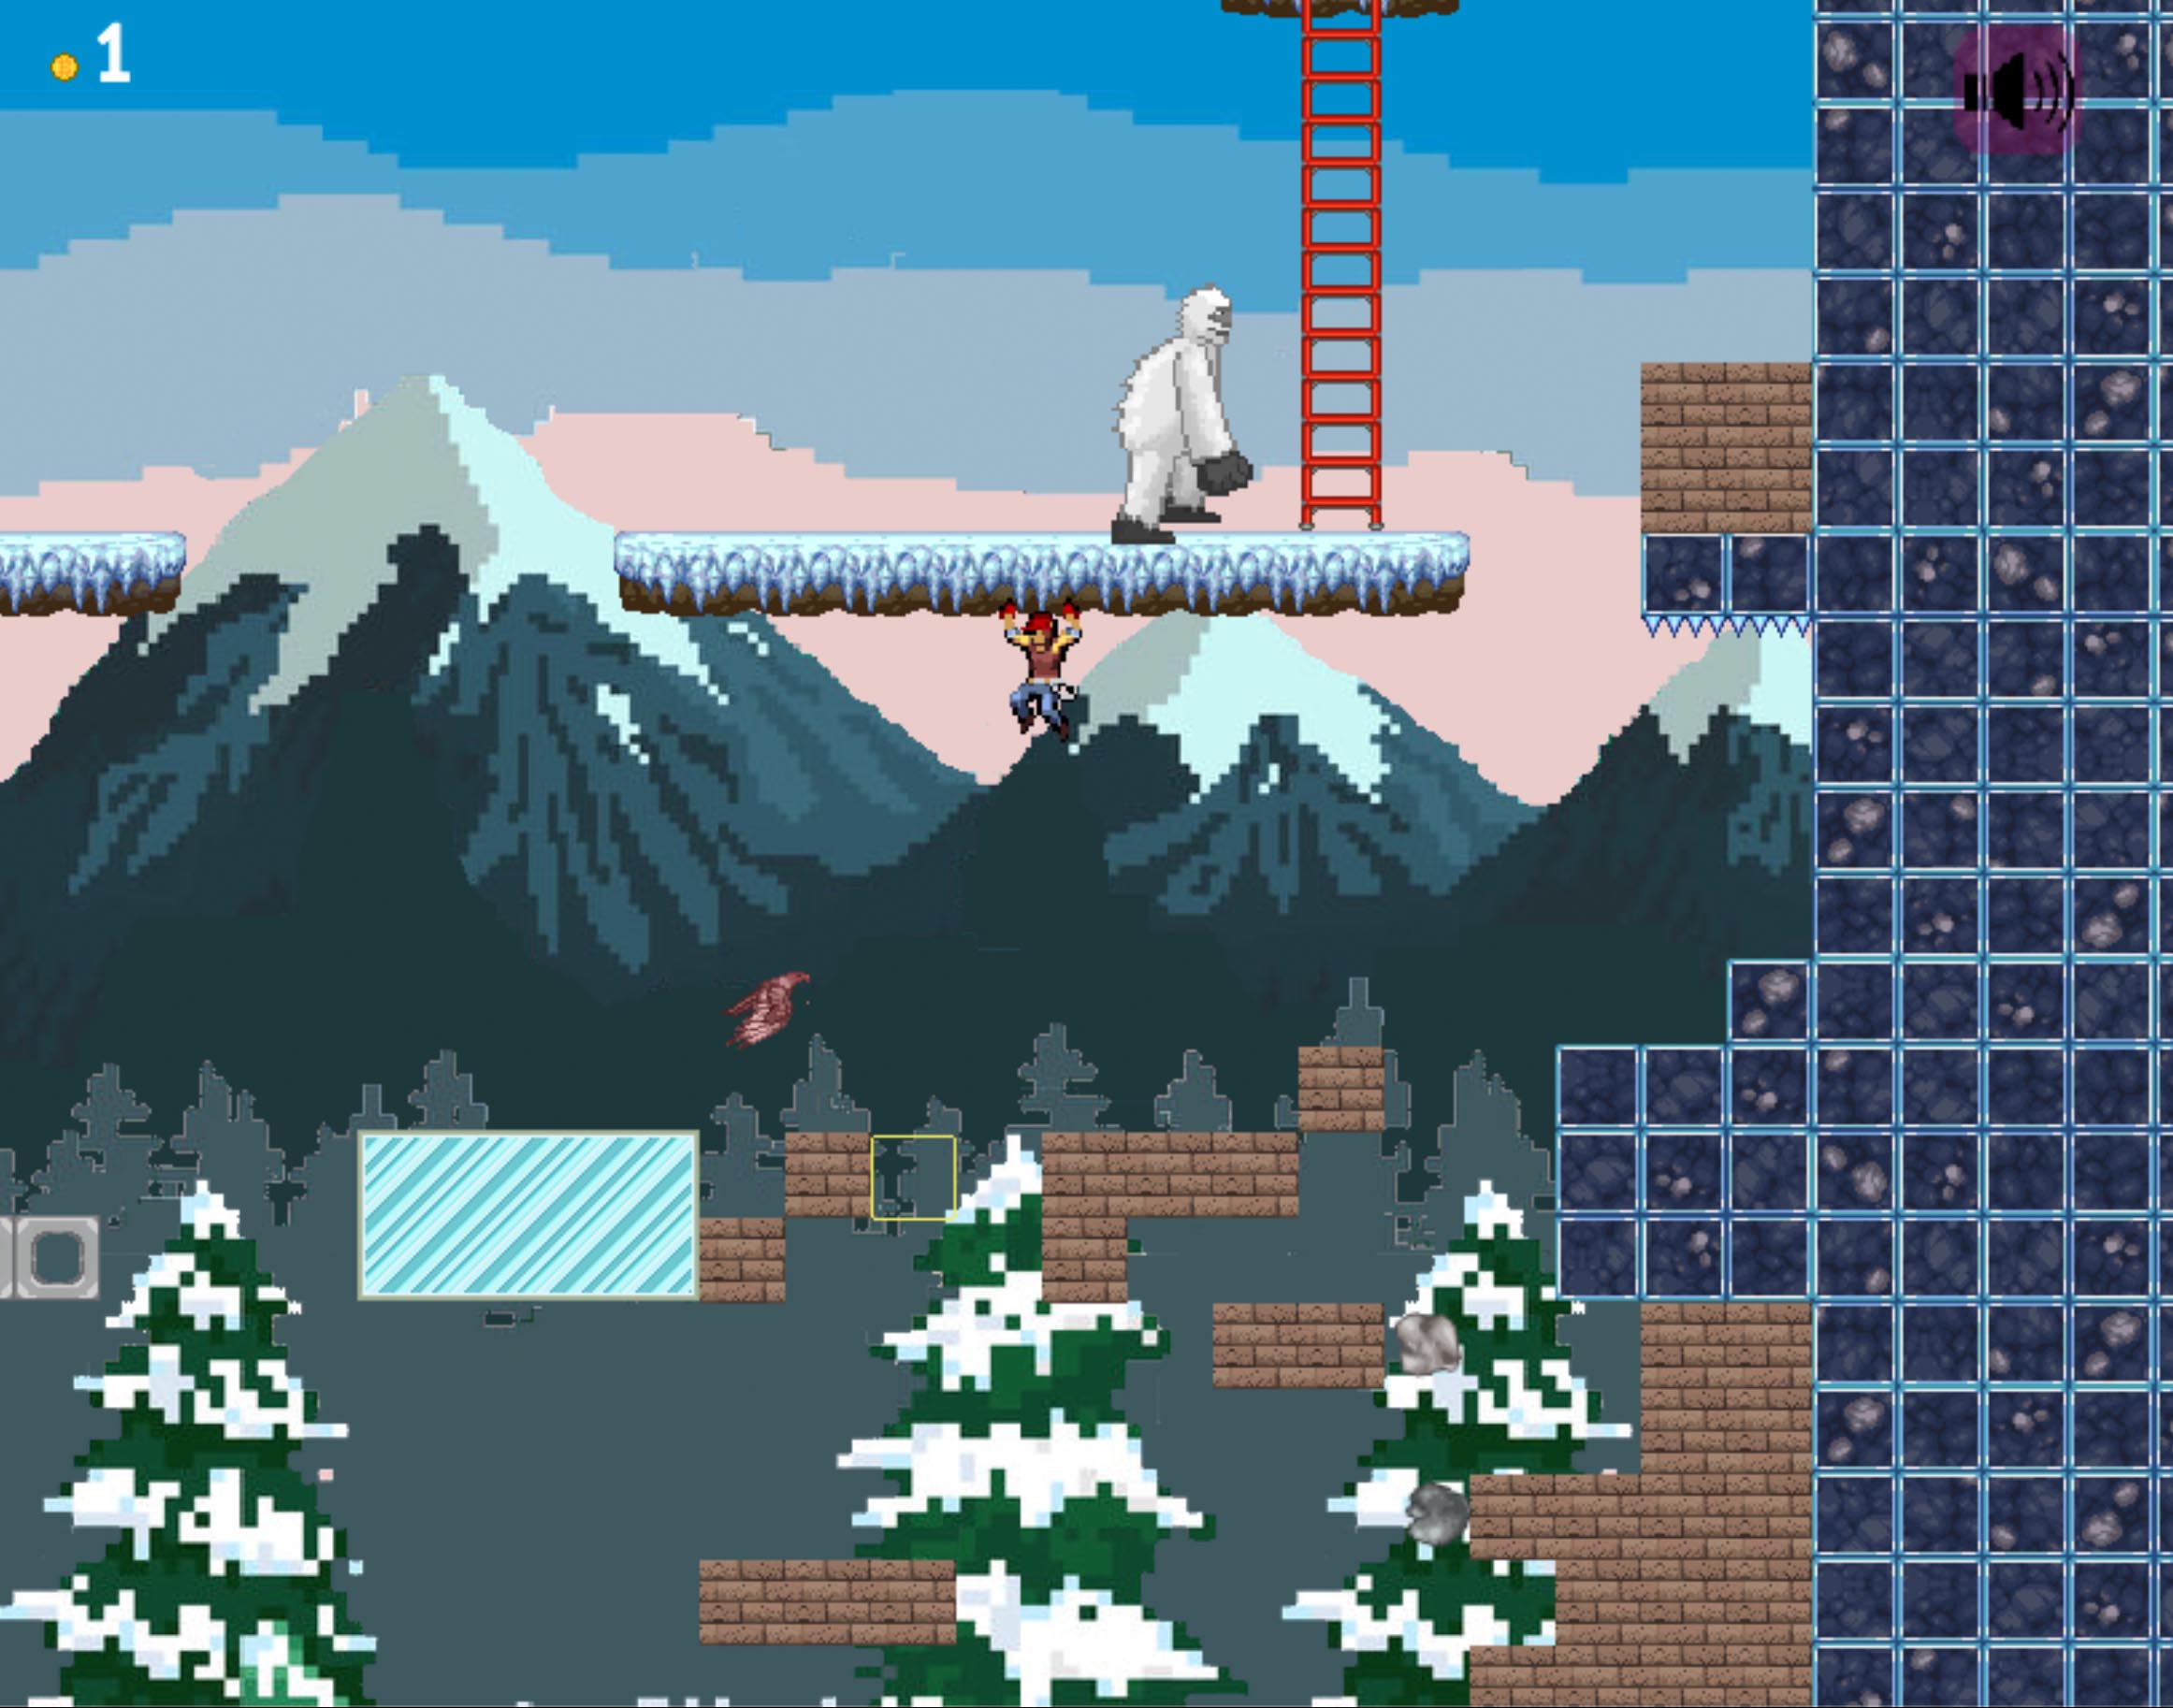 This is a screenshot from Context Clues Climber. The player is hanging from an icy cliff underneath an abominable snowman.